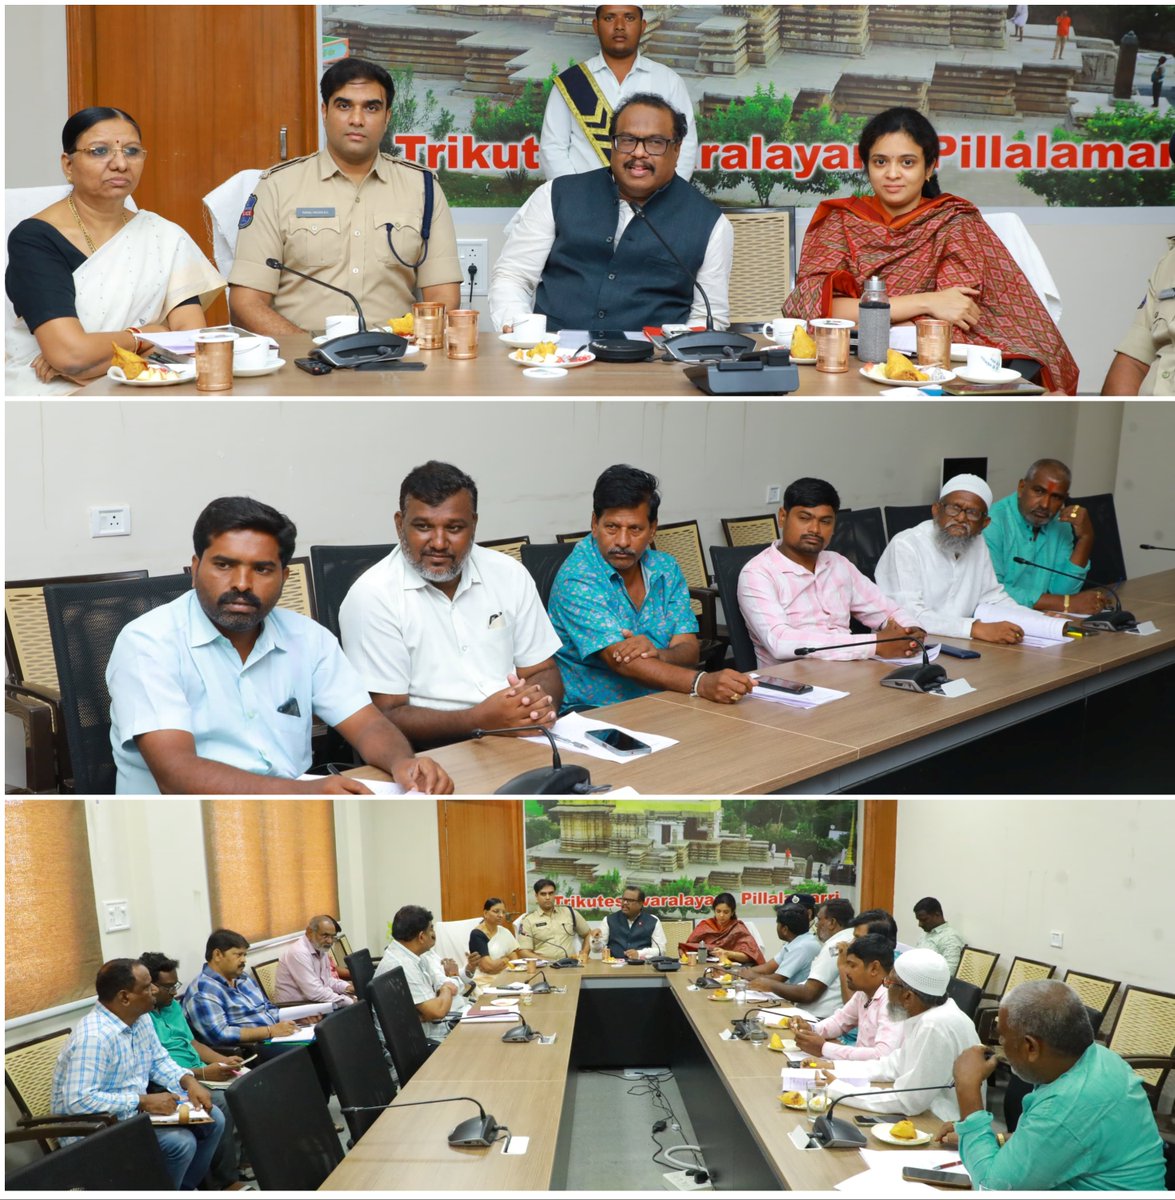 District Election Officer along with SP,AC LB,AC REV,has conducted meeting with all political parties on MLC Election -2024 at meeting hall, IDOC complex Suryapet.@CEO_Telangana @ECISVEEP @Iamsvr2222